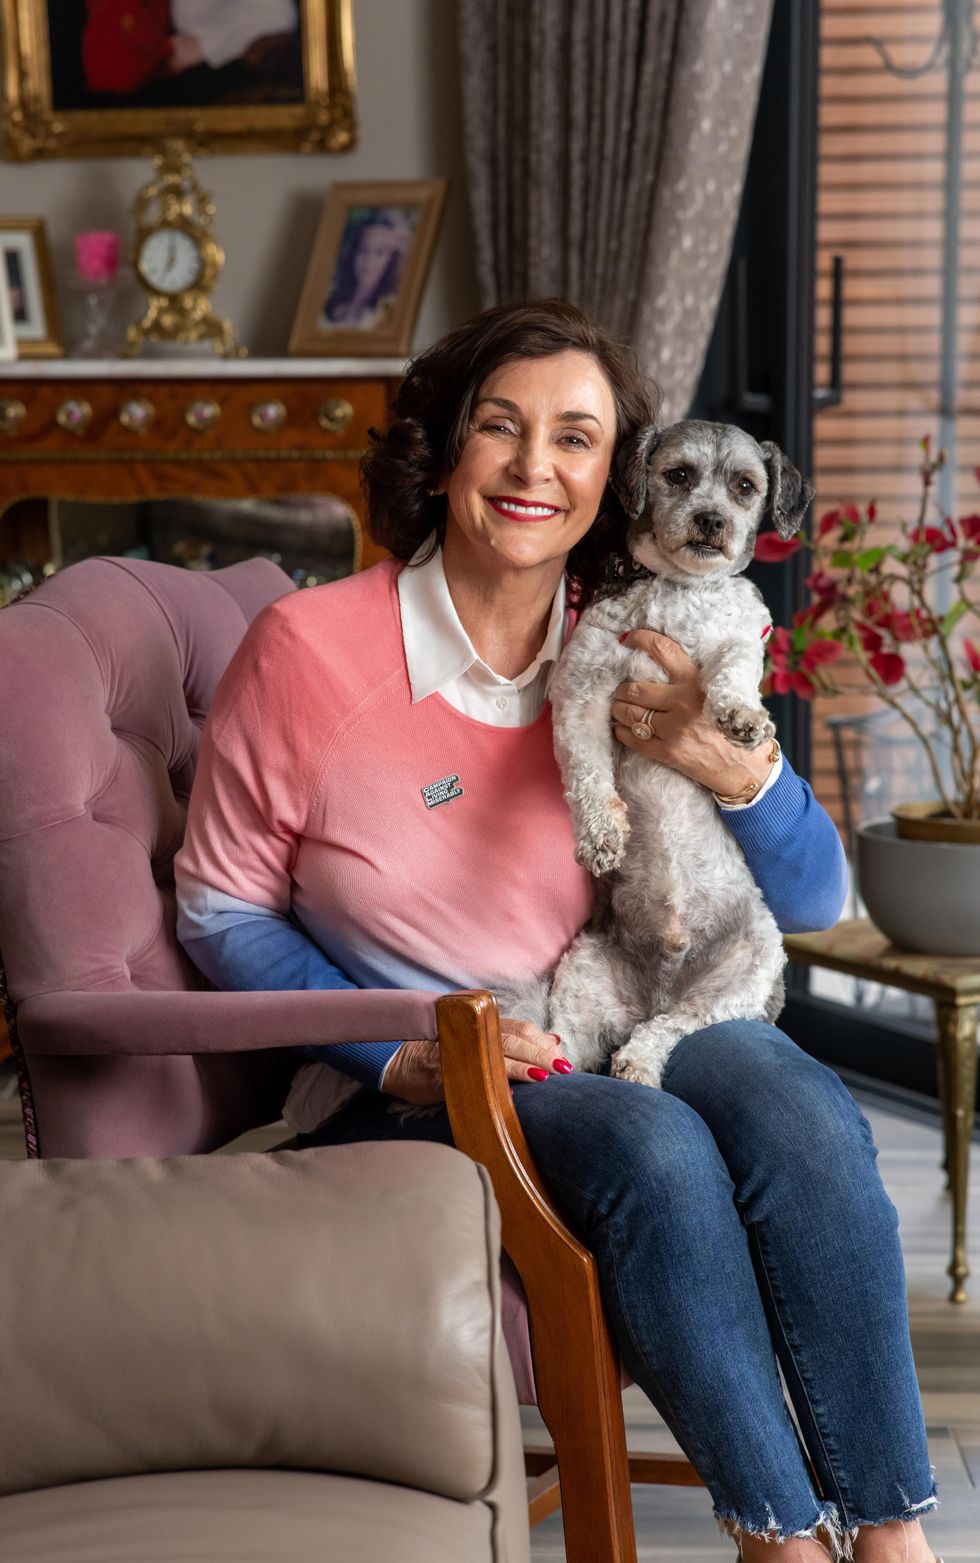 Shirley Ballas among stars voicing animals in advert for RSPCA 200th anniversary